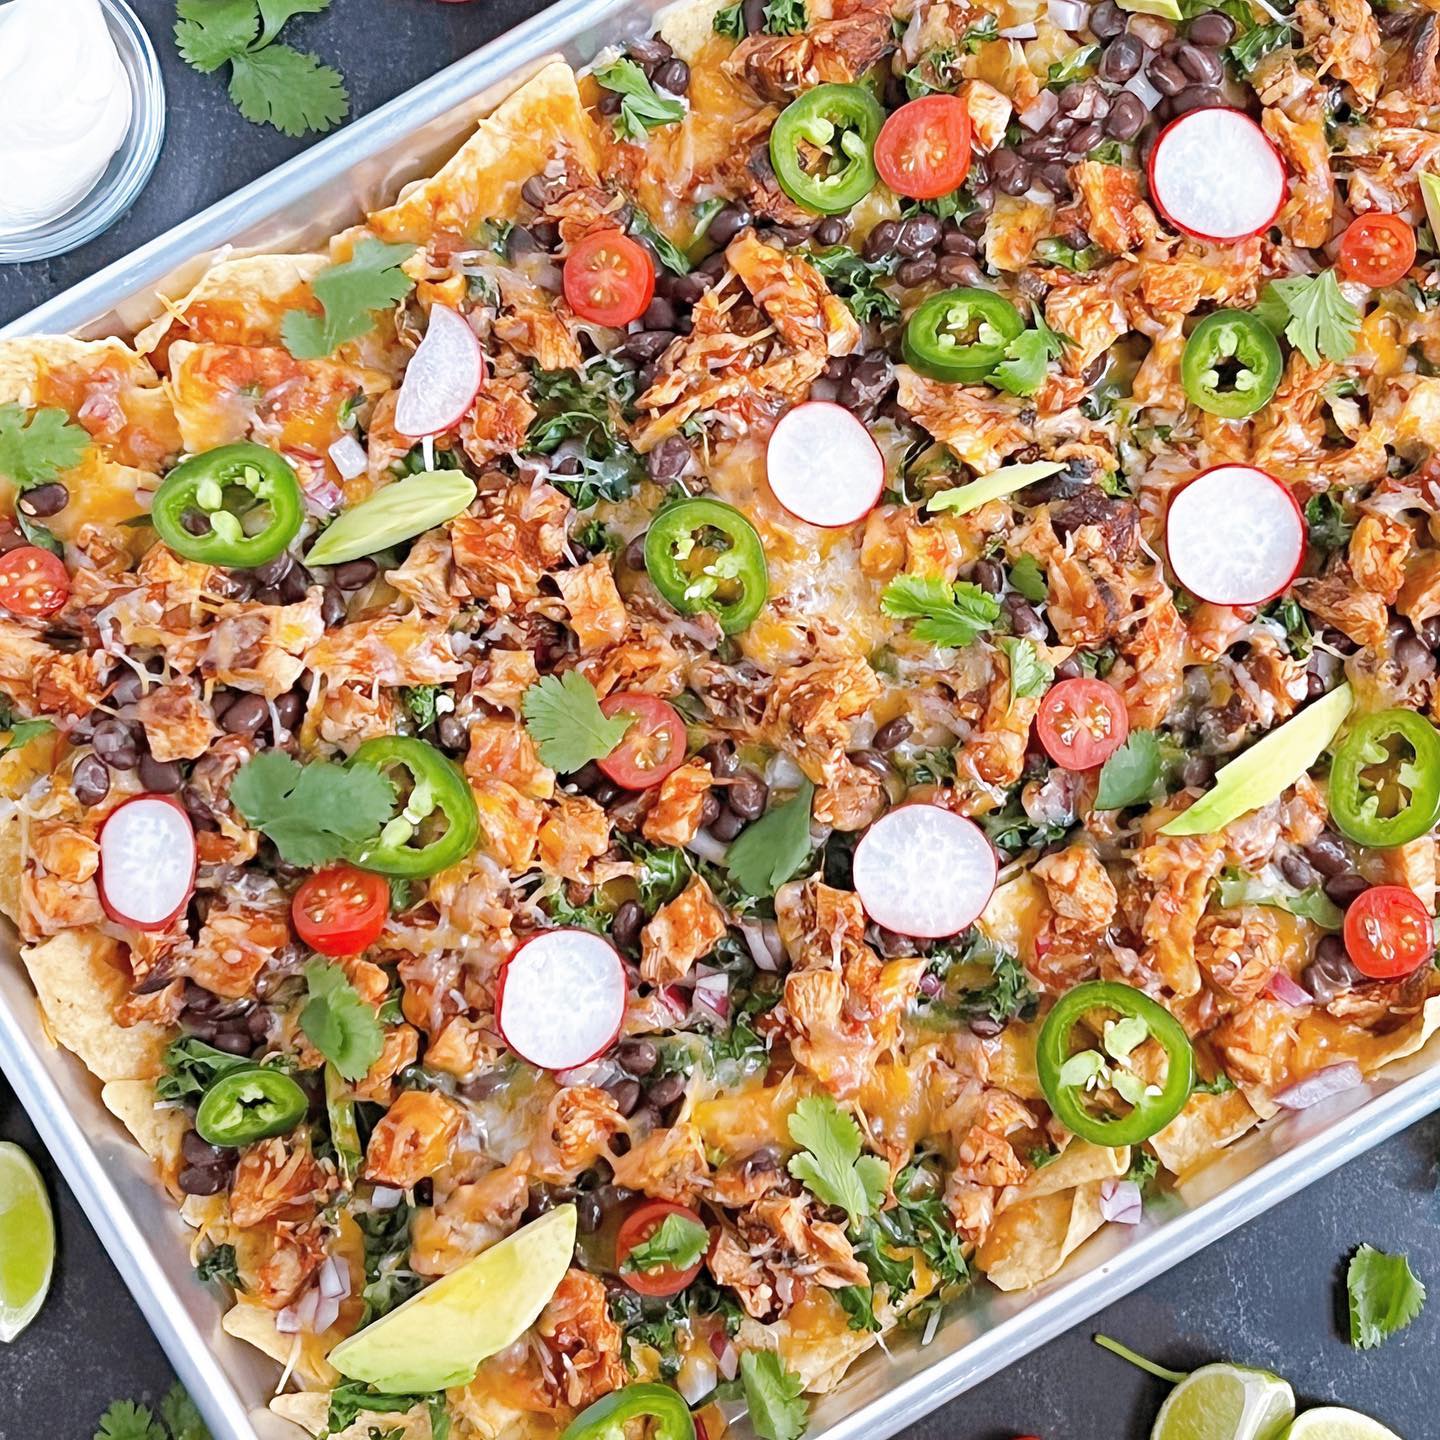 I hope y’all didn’t forget the nachos this year for the Super Bowl game tonight! 🏈 I promise my Loaded Sheet Pan Chicken Nachos are super easy! Think I’m kidding? Check out my video reel. 

RECIPE LINKED TO PROFILE BIO 👉🏽

°°°
#loadednachos #superbowlfood #chickennachos #footballparty #superbowlhalftimeshow #dcfoodie #dmvfoodies #dmvfoodporn #dcfood #chickenrecipe #nachorecipe #gamedayfood #dcfoodblogger #dmvfoodblogger #sheetpanrecipes #grilledchickennachos #blackgirlswhocook #homecooking #homerecipes #easynachos